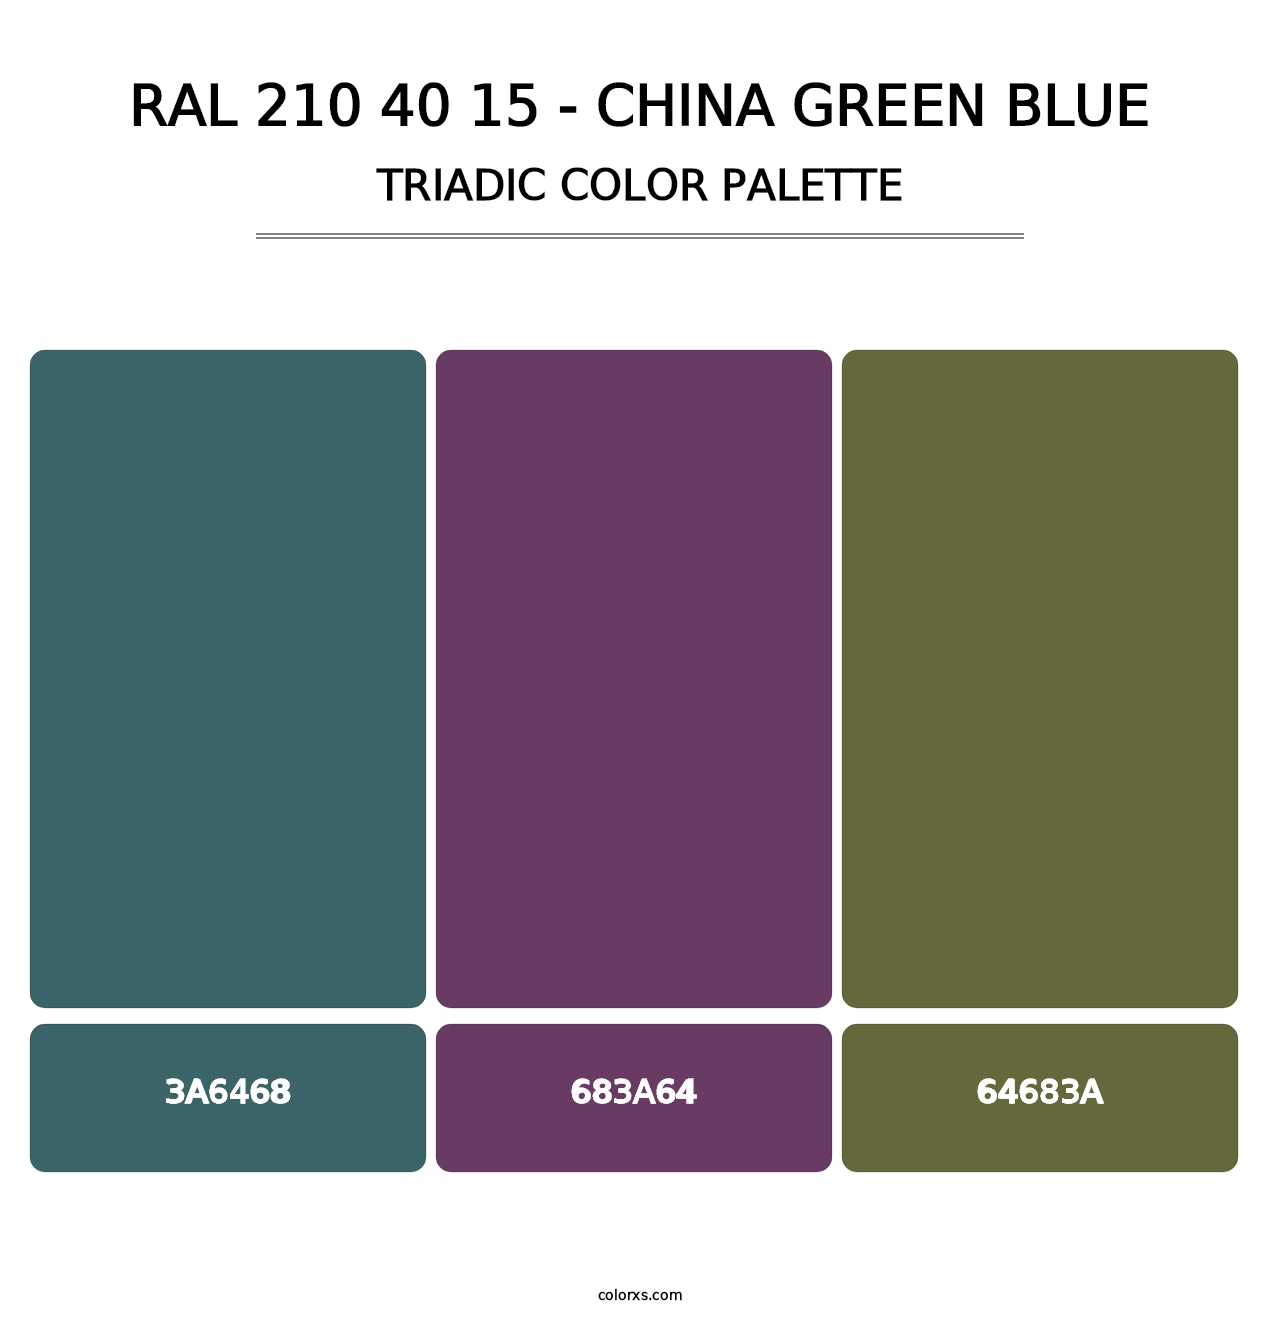 RAL 210 40 15 - China Green Blue - Triadic Color Palette